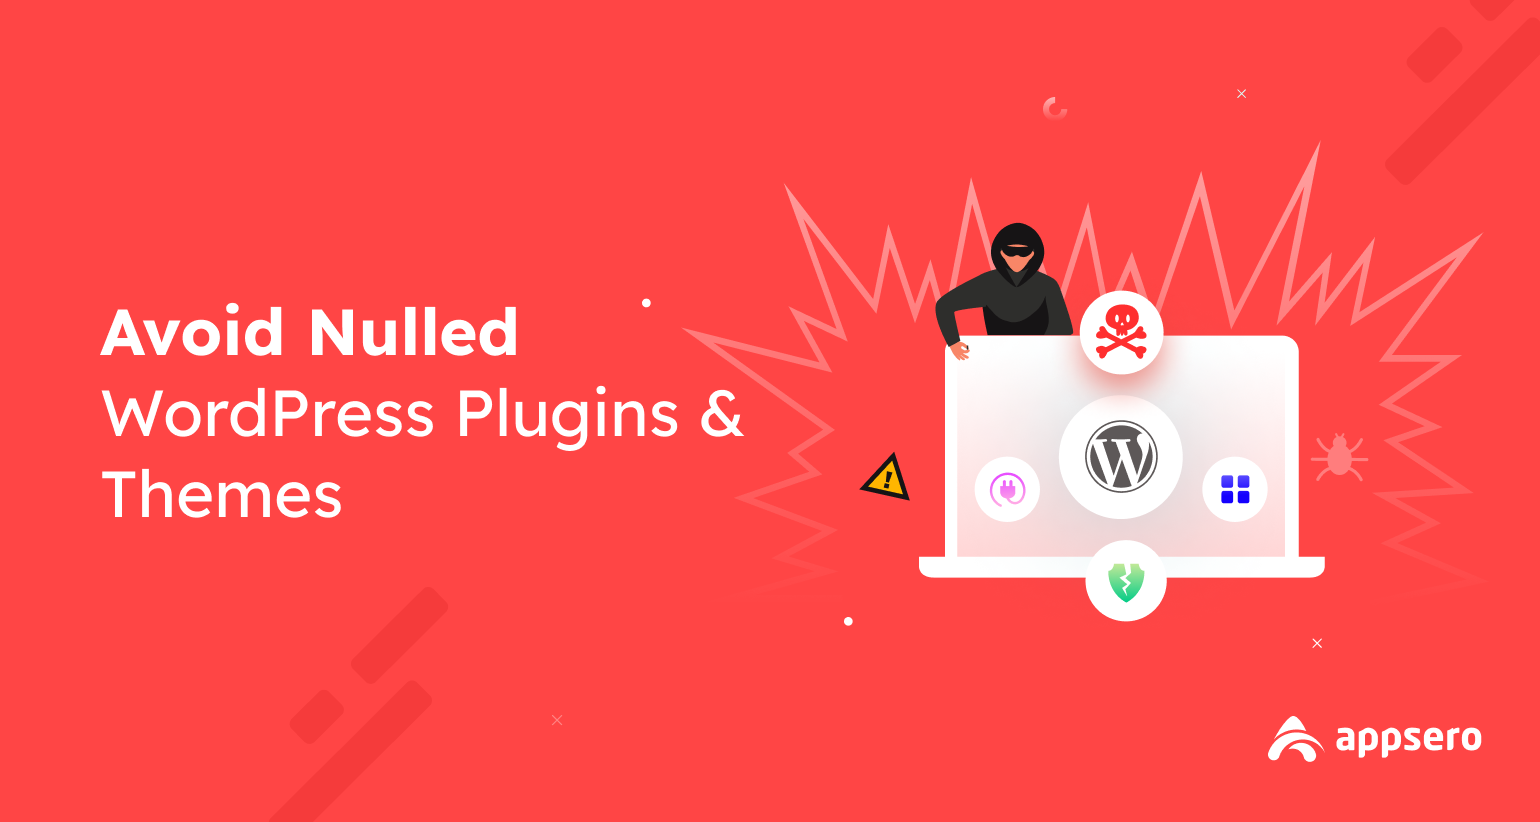 Why You Should Avoid Nulled WordPress Plugins & Themes – 9 Valid Reasons